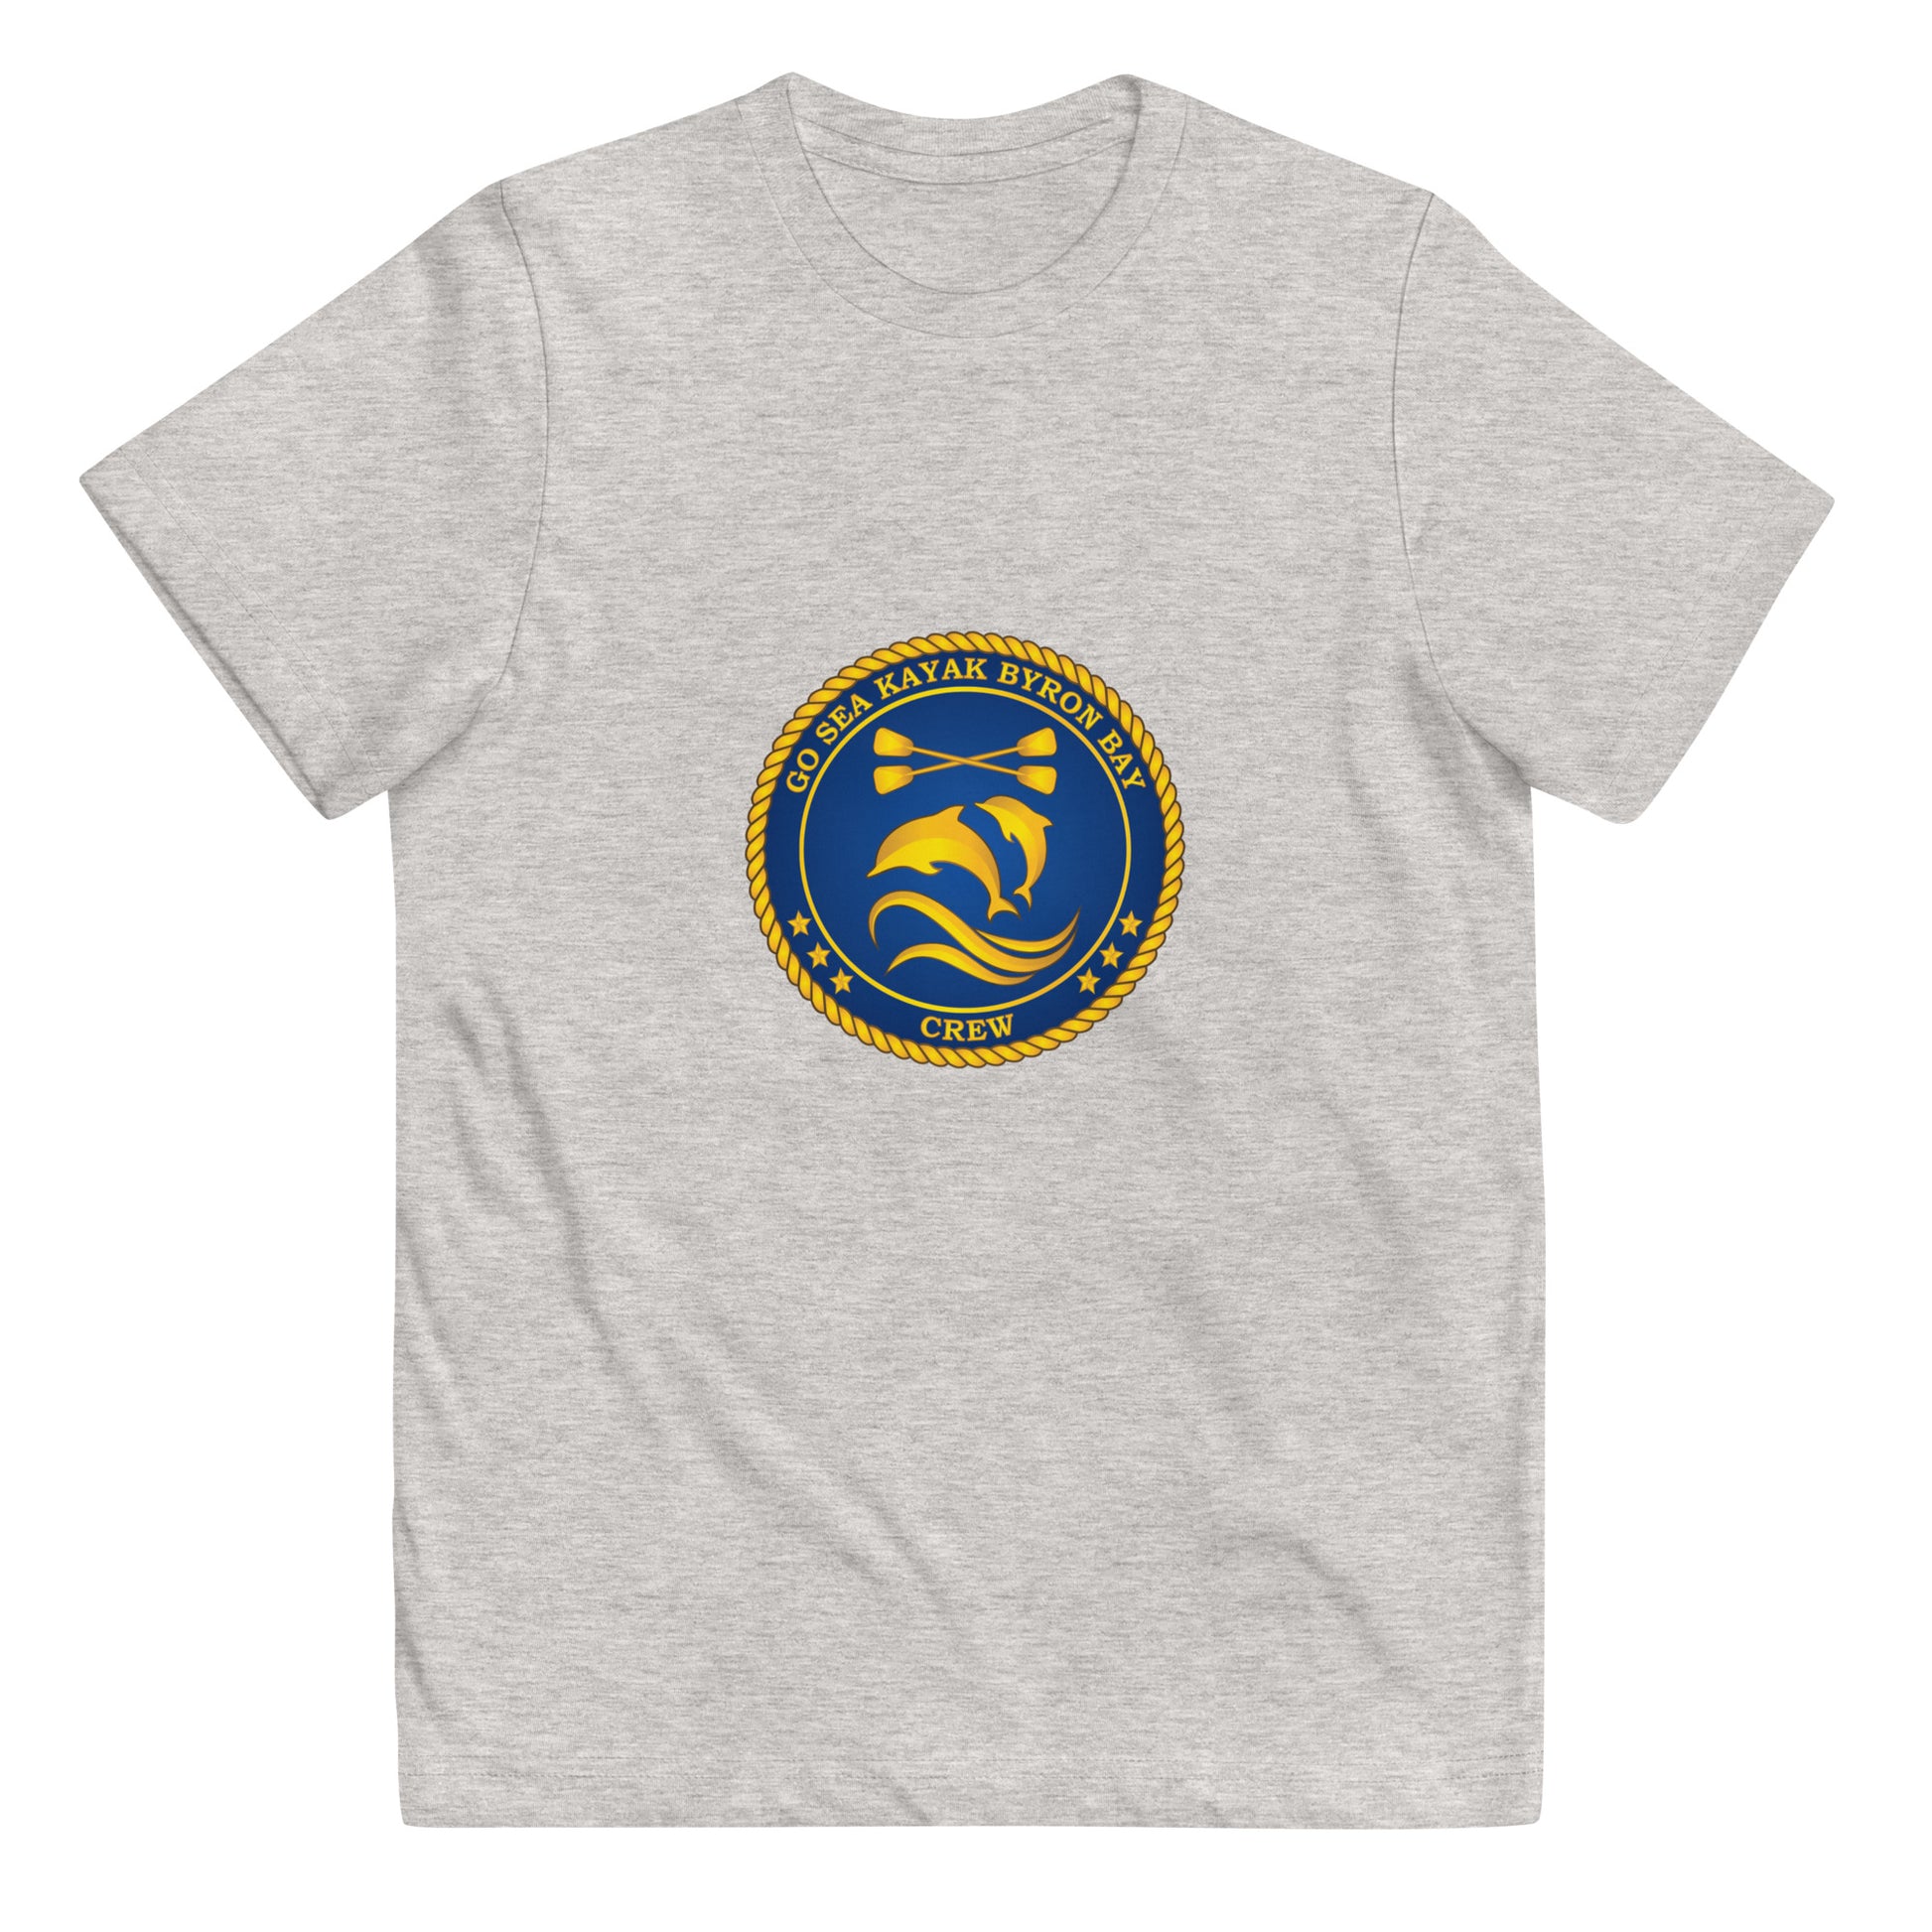  Kids T-Shirt - Natural / Heather colour - Front flat lay view - Go Sea Kayak Byron Bay Crew (issue 2018-2019) logo on front - Genuine Byron Bay Merchandise | Produced by Go Sea Kayak Byron Bay 